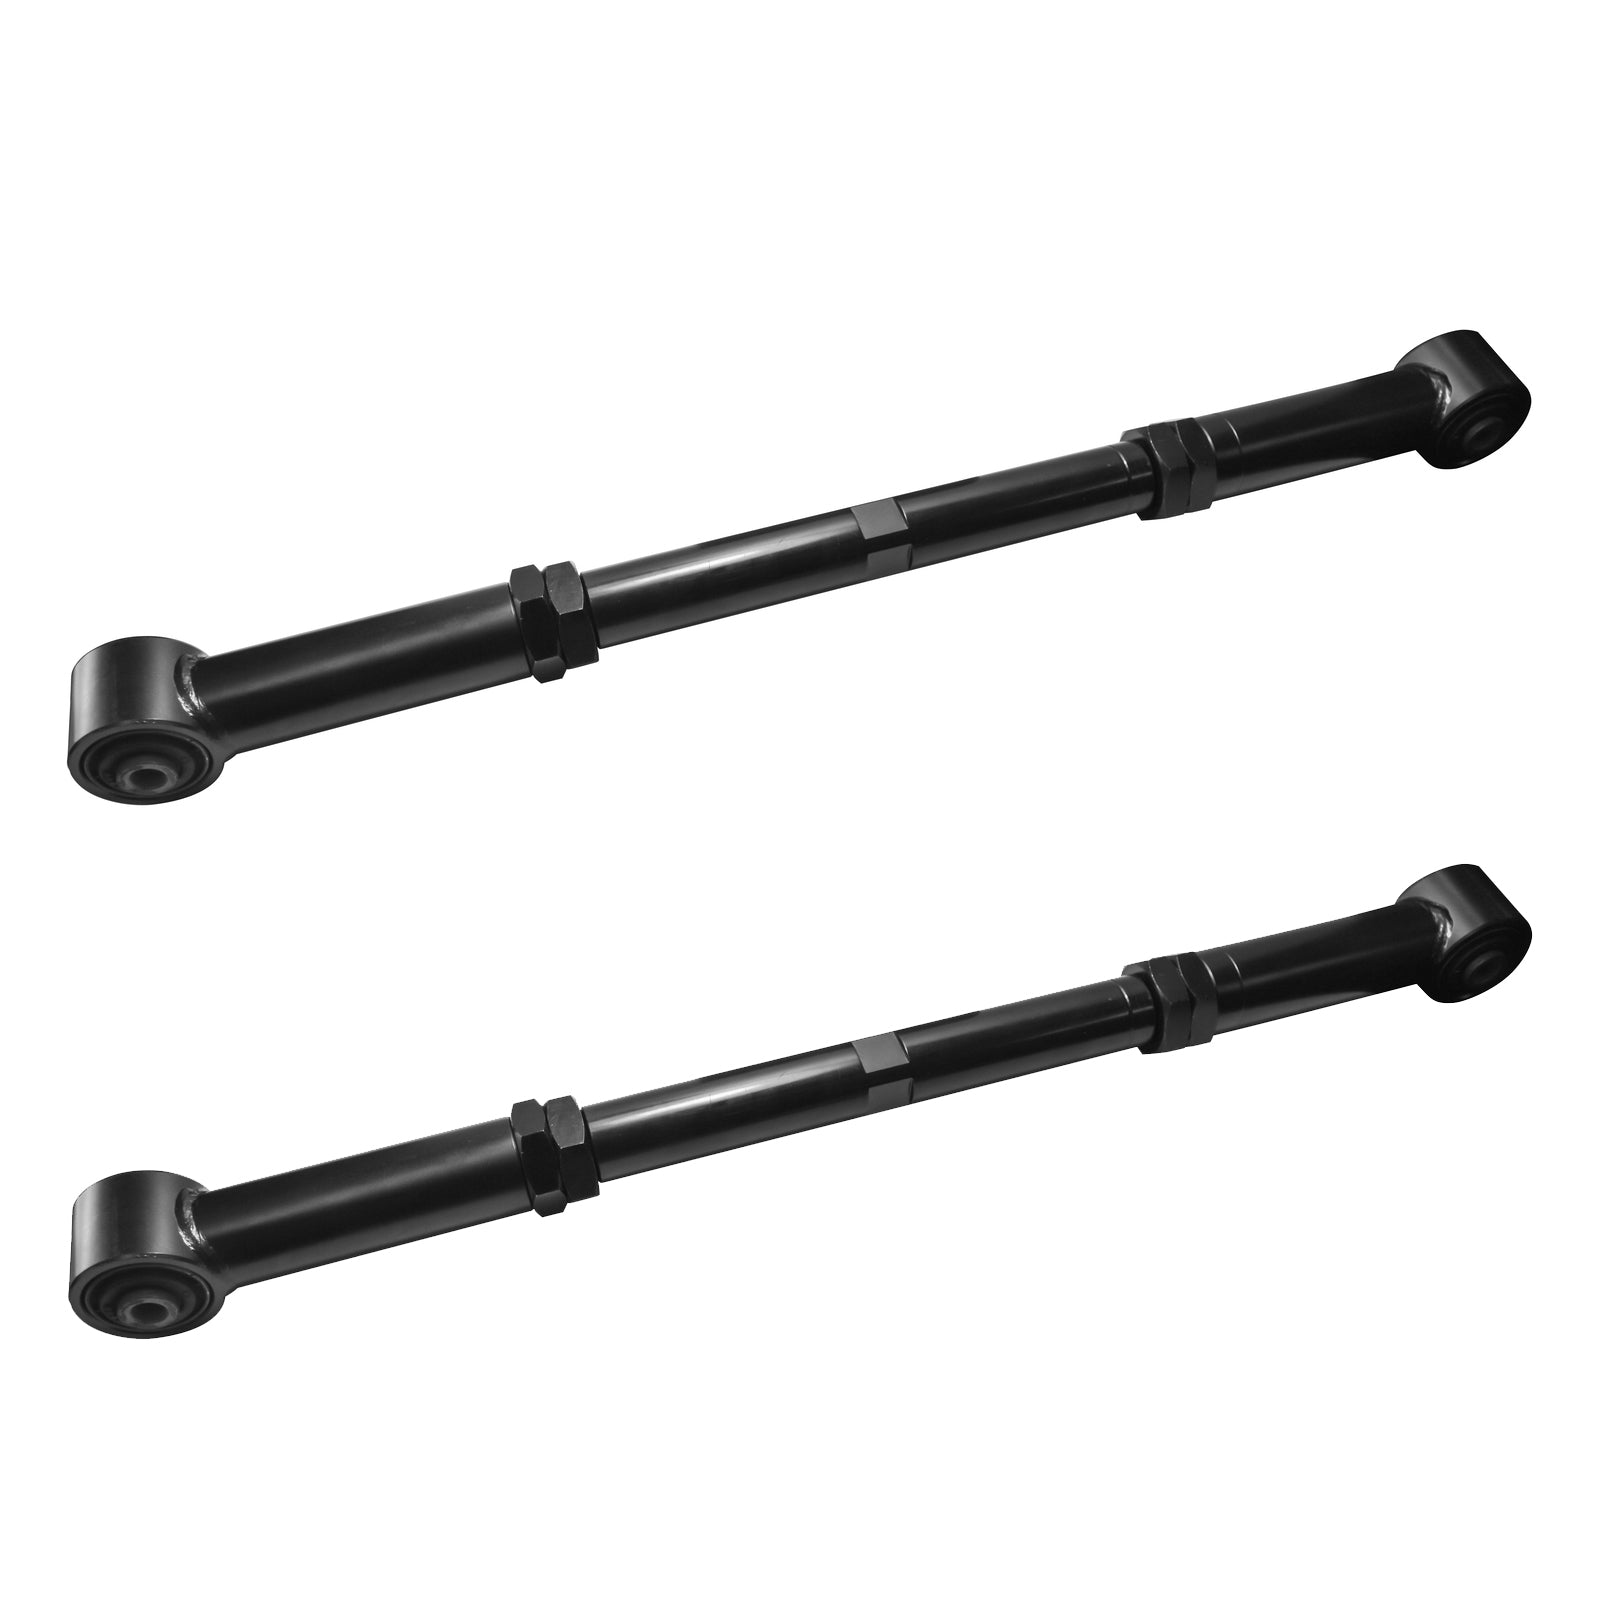 Roadsafe 4wd Adjustable Lower Rear Control Trailing Arms for Nissan Navara NP300 D23 | Roadsafe